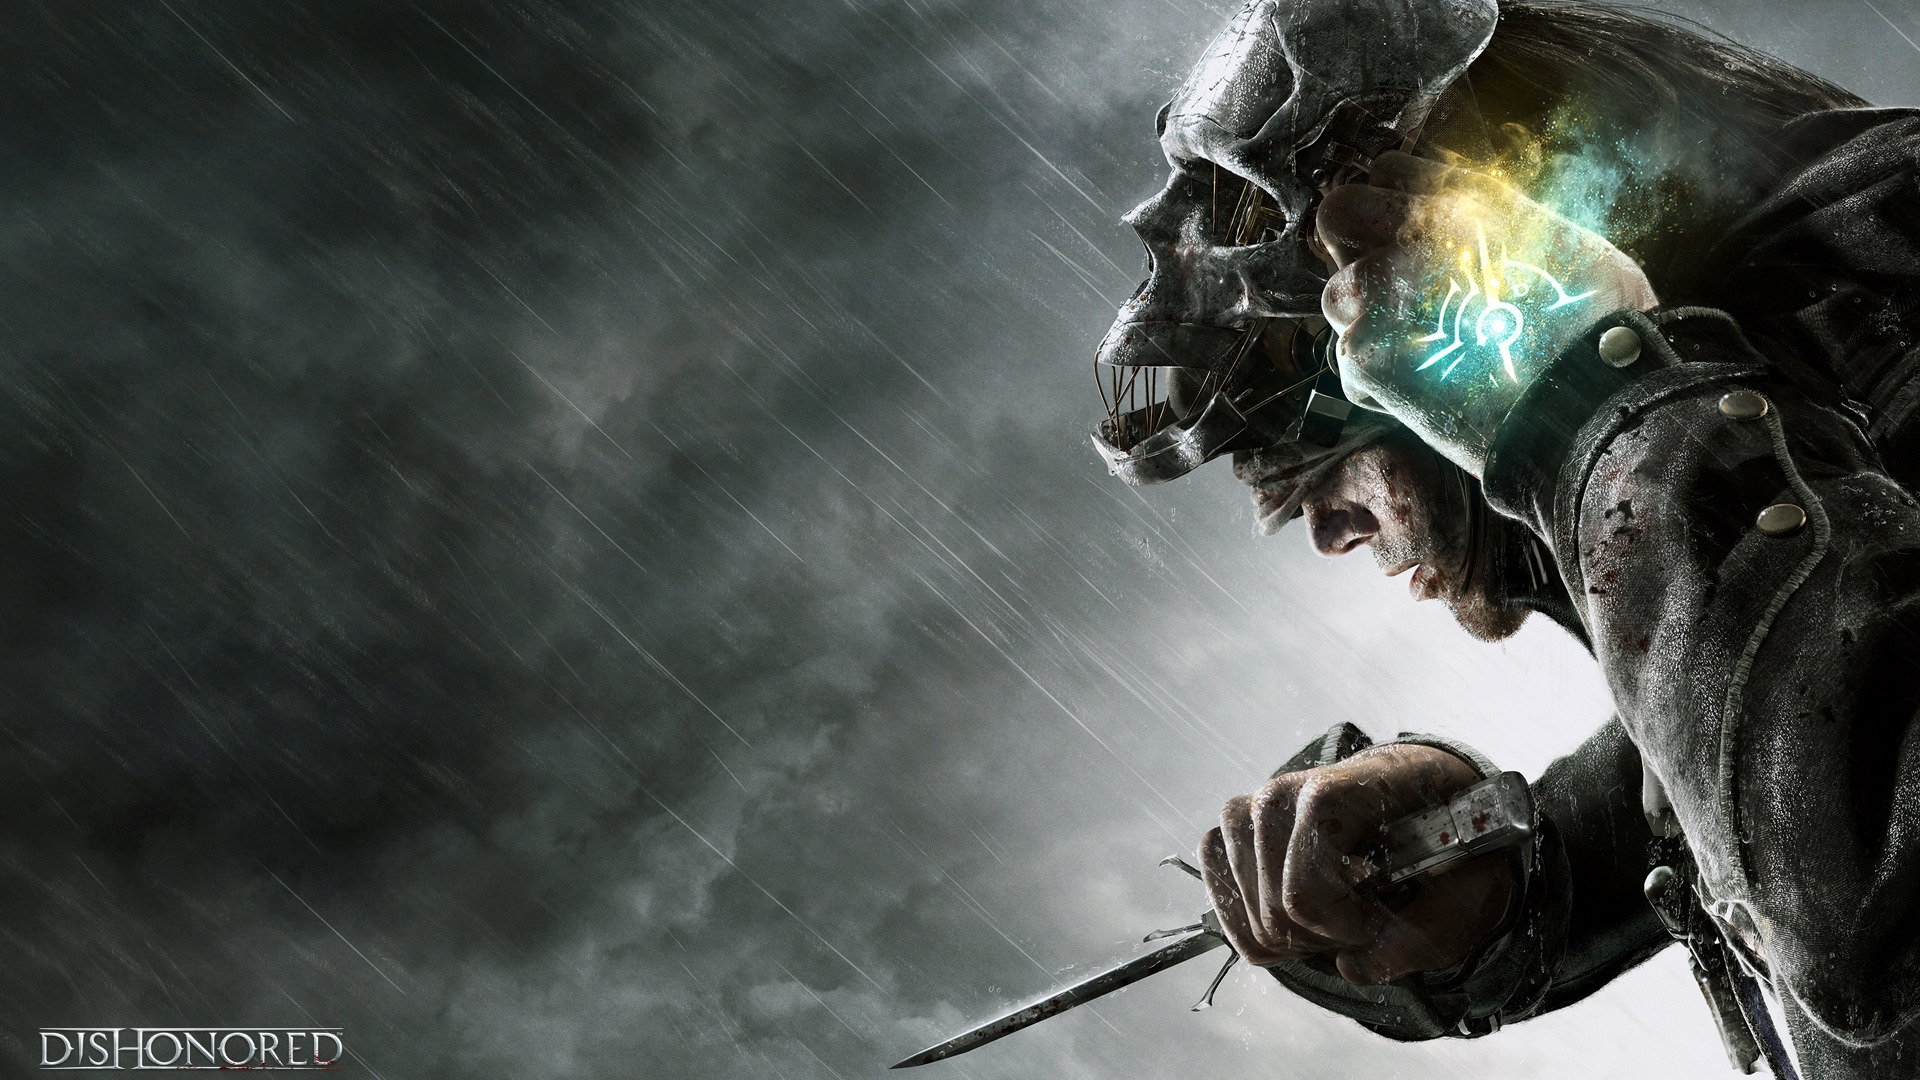 Dishonored Game for 1920 x 1080 HDTV 1080p resolution